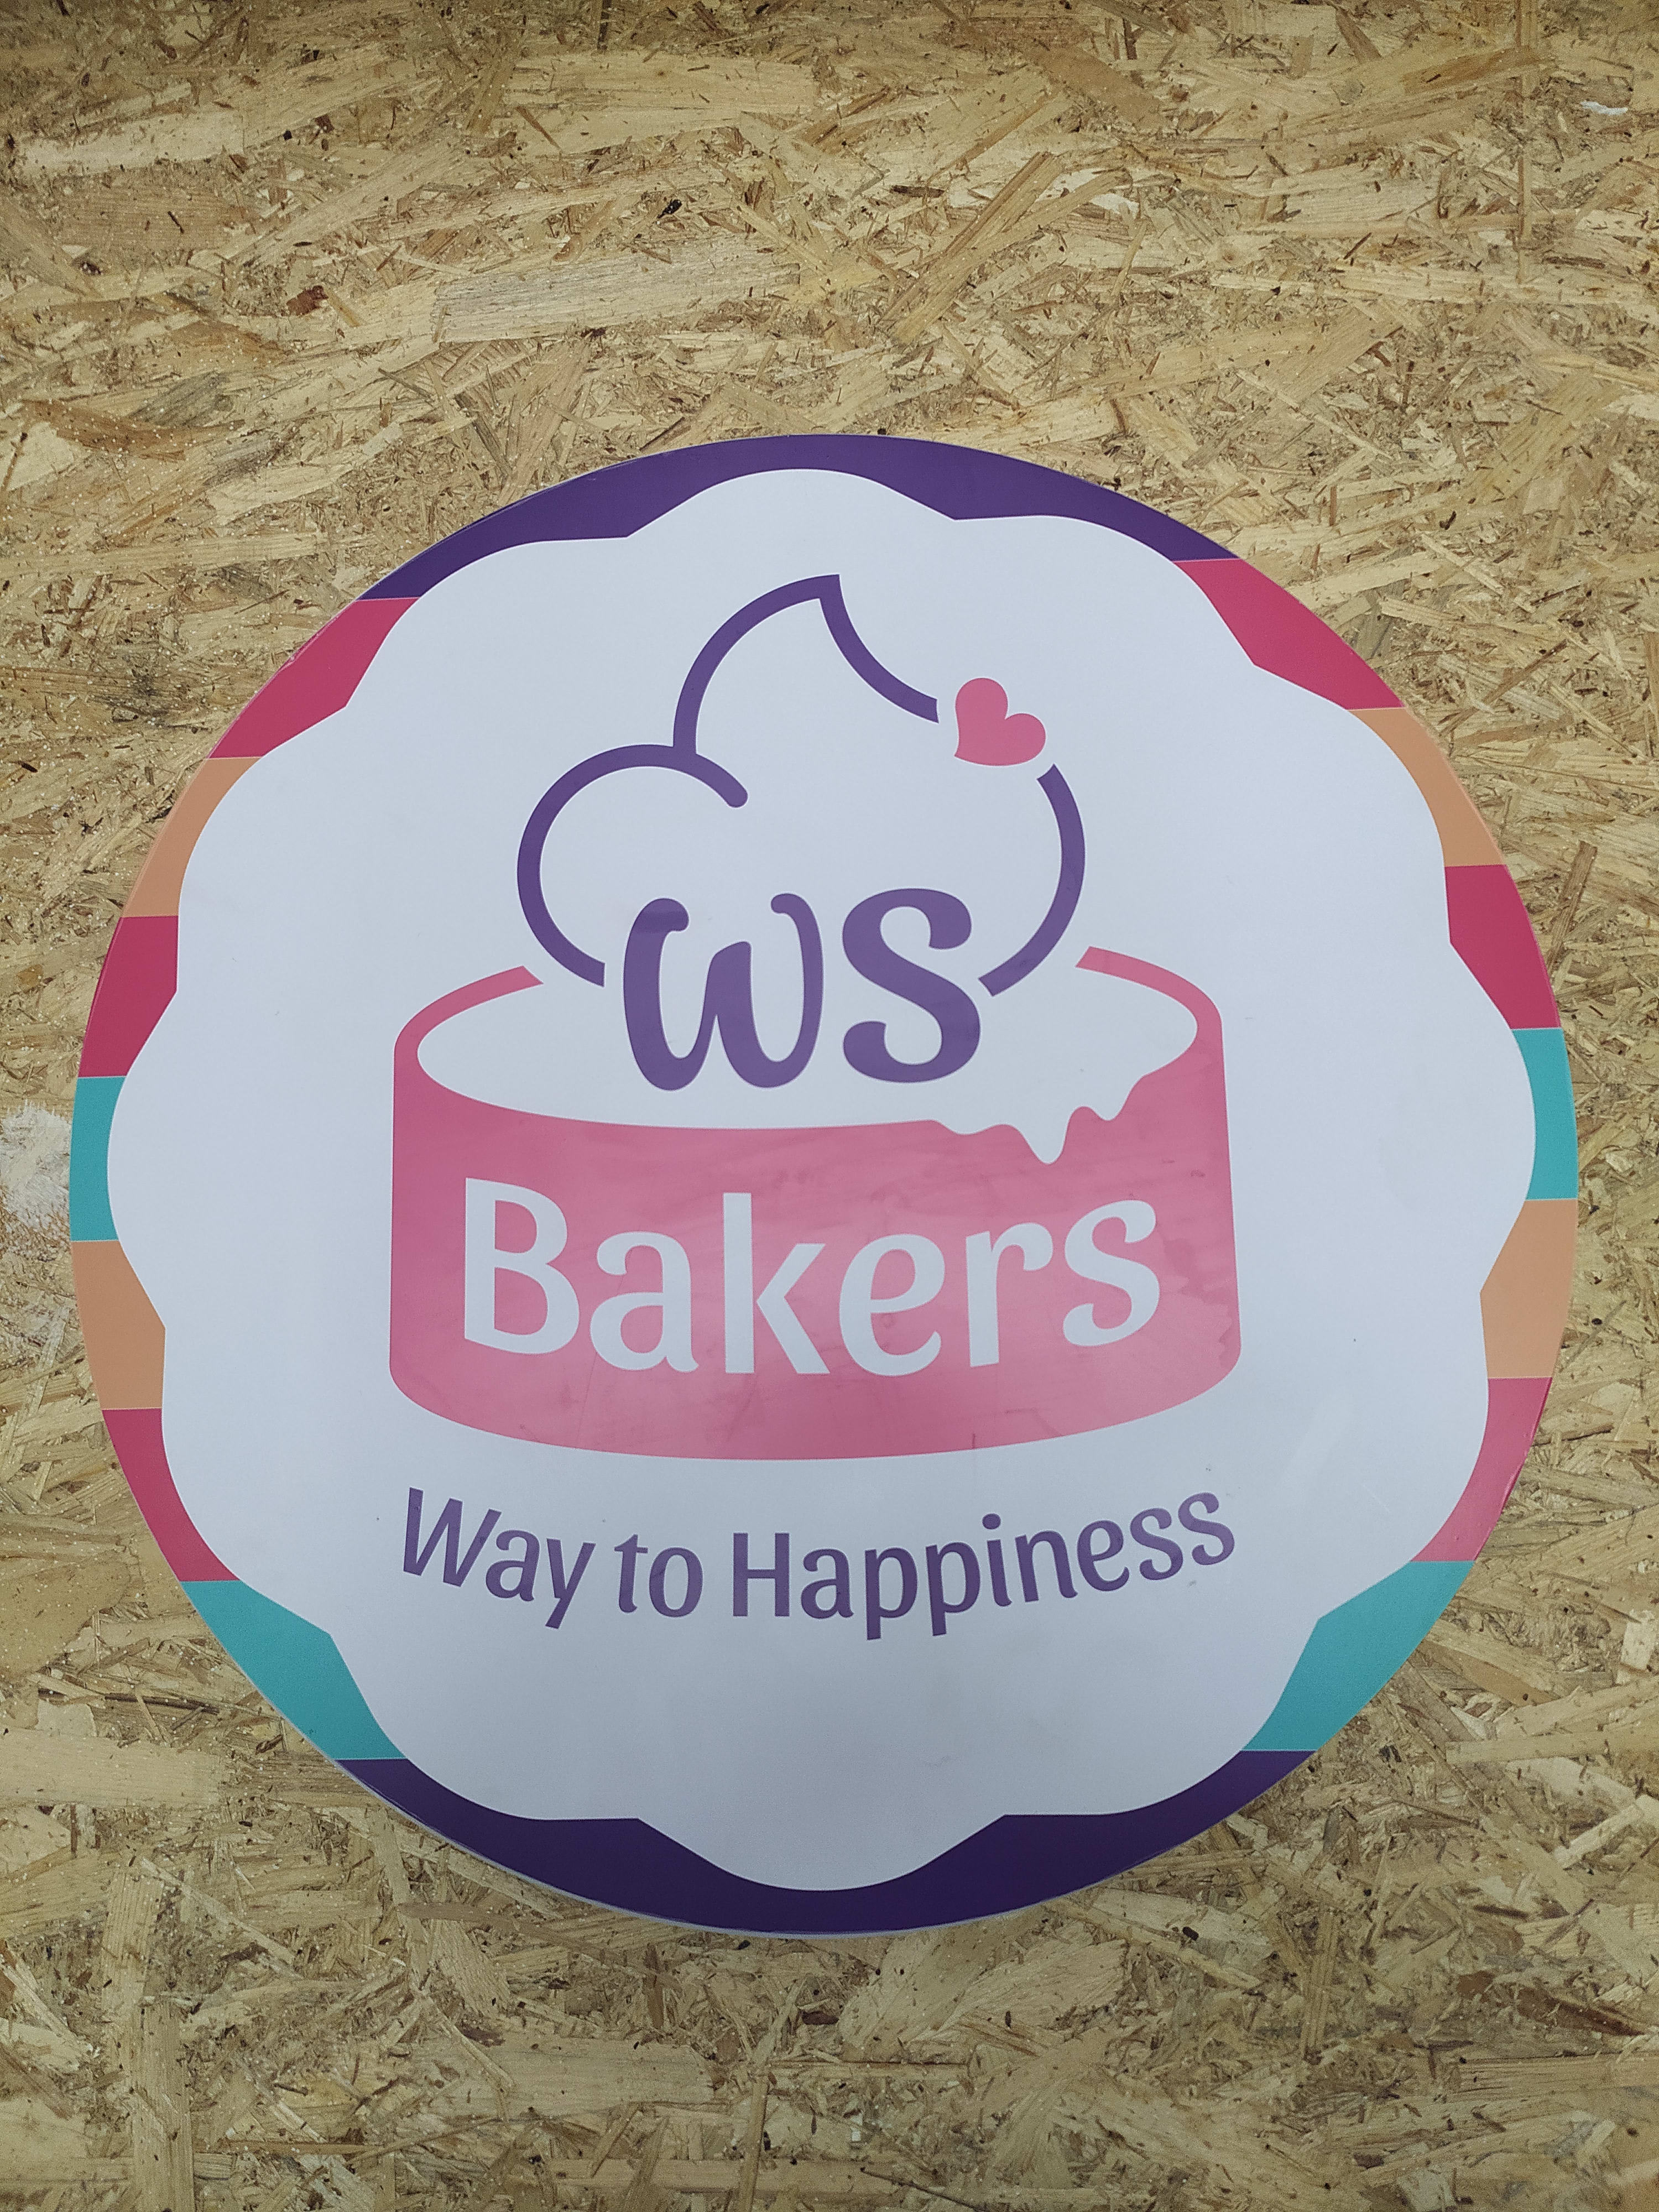 WS Bakers Cake Shop